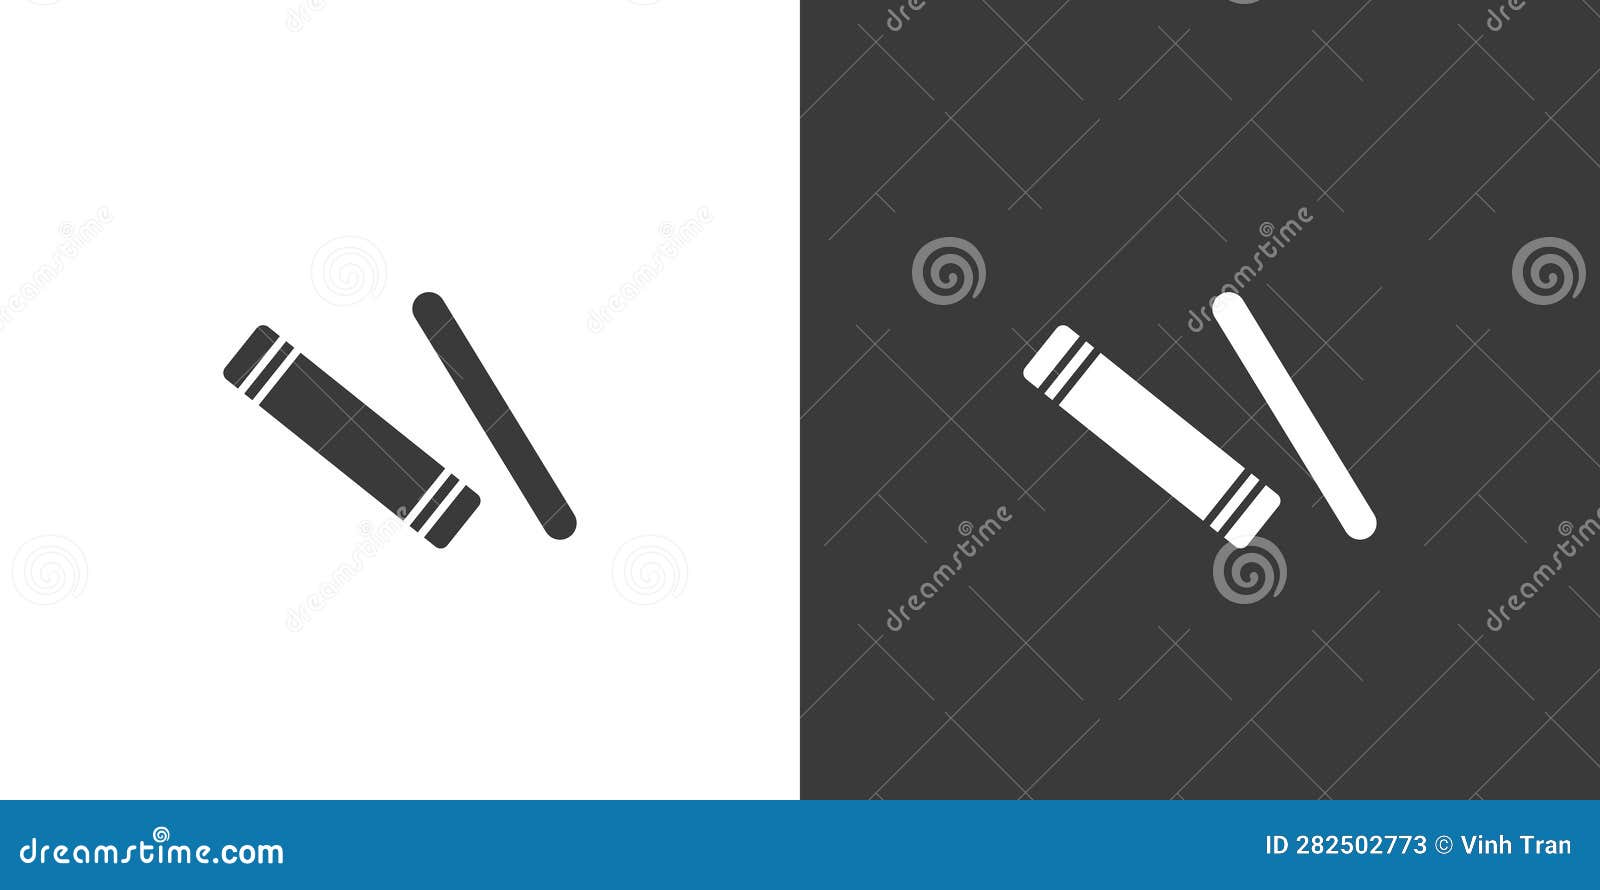 claves flat web icon. wooden claves logo . percussion instrument pair claves sign silhouette solid black icon  